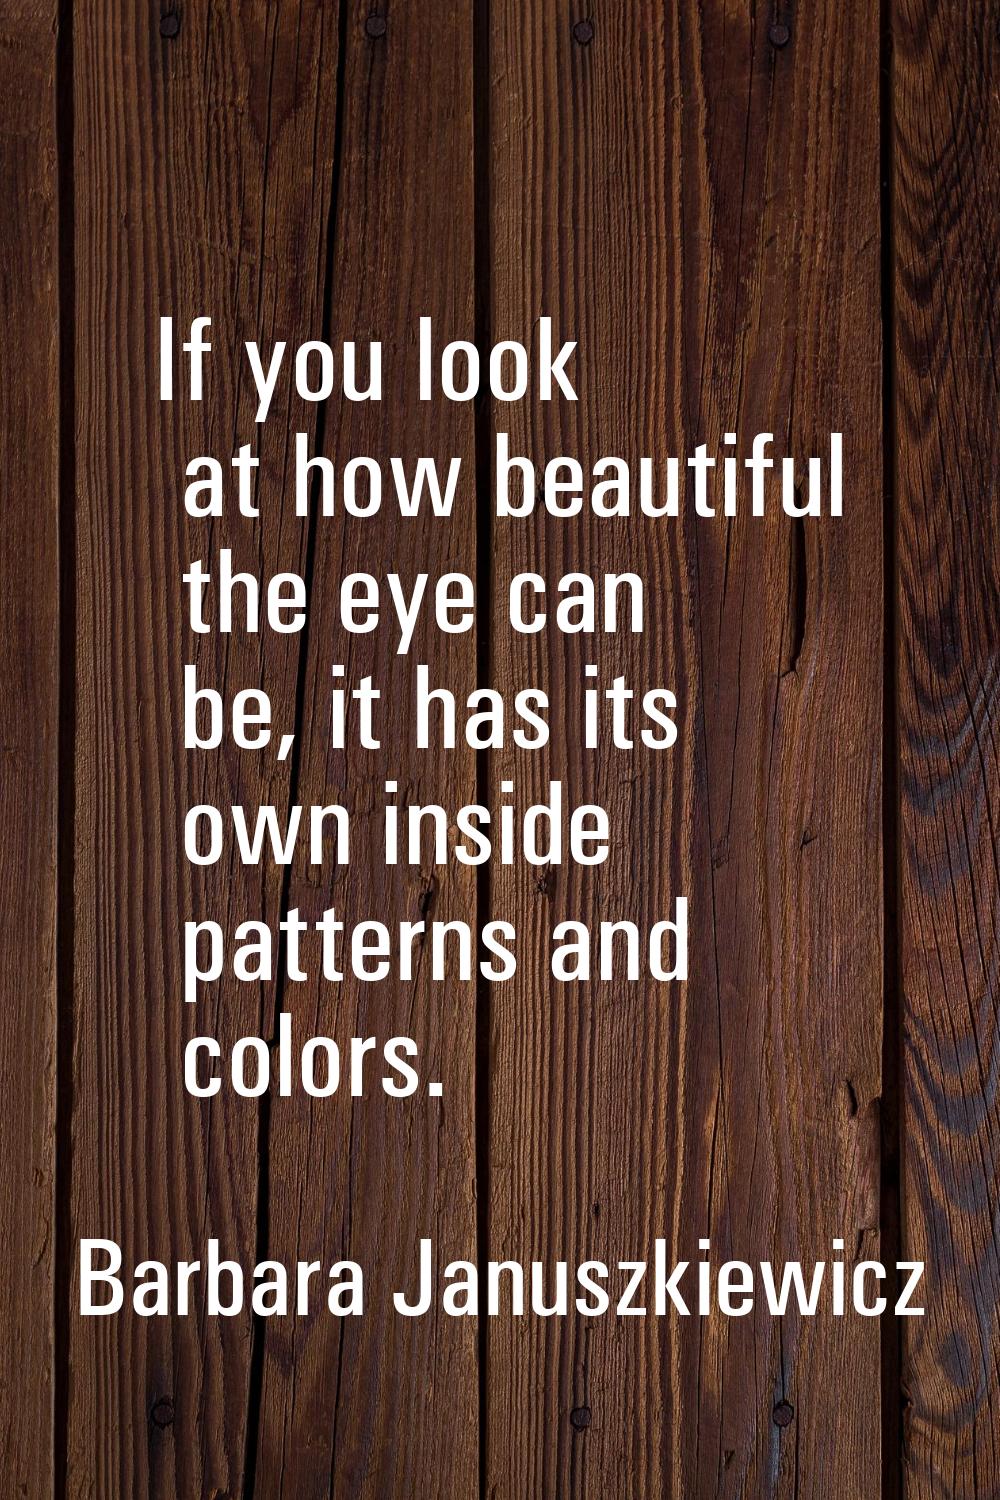 If you look at how beautiful the eye can be, it has its own inside patterns and colors.